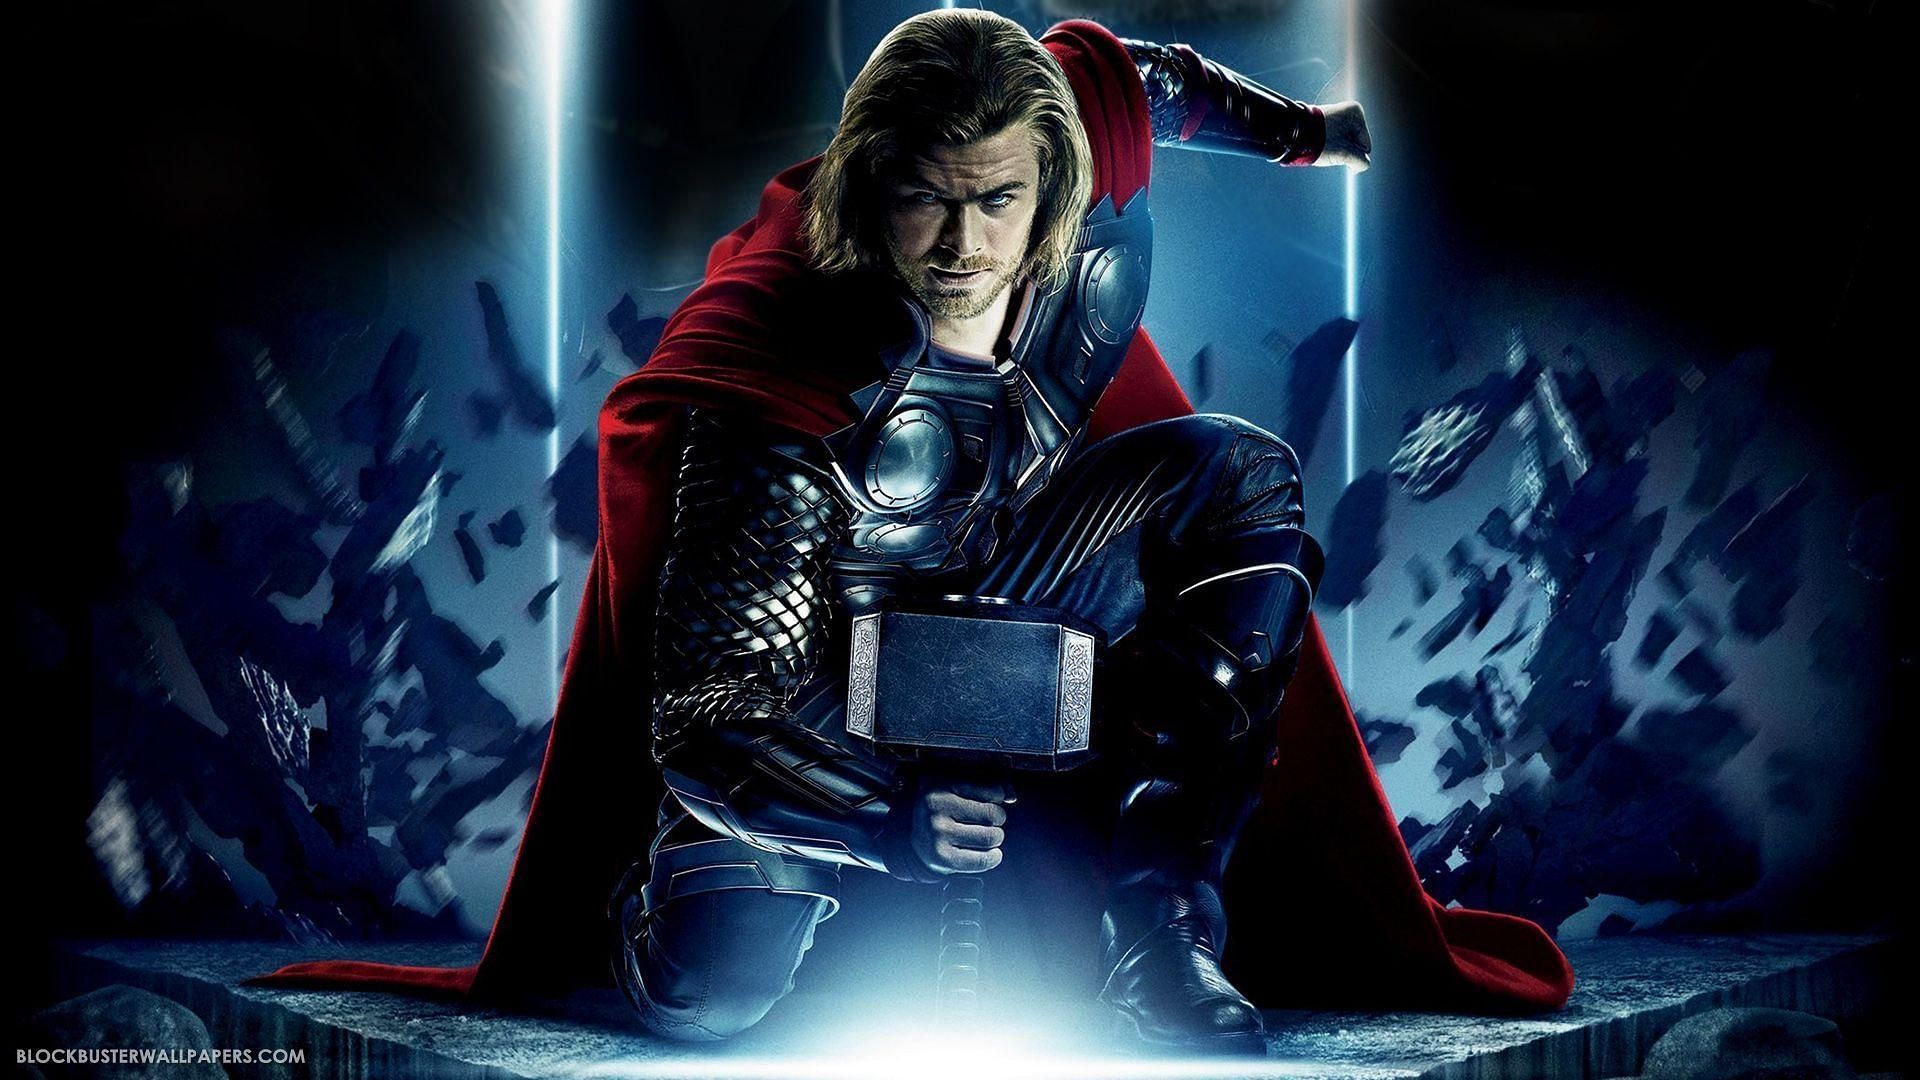 Thor in Thor (2011) (Image Credit: Paramount Pictures/Marvel Studios)